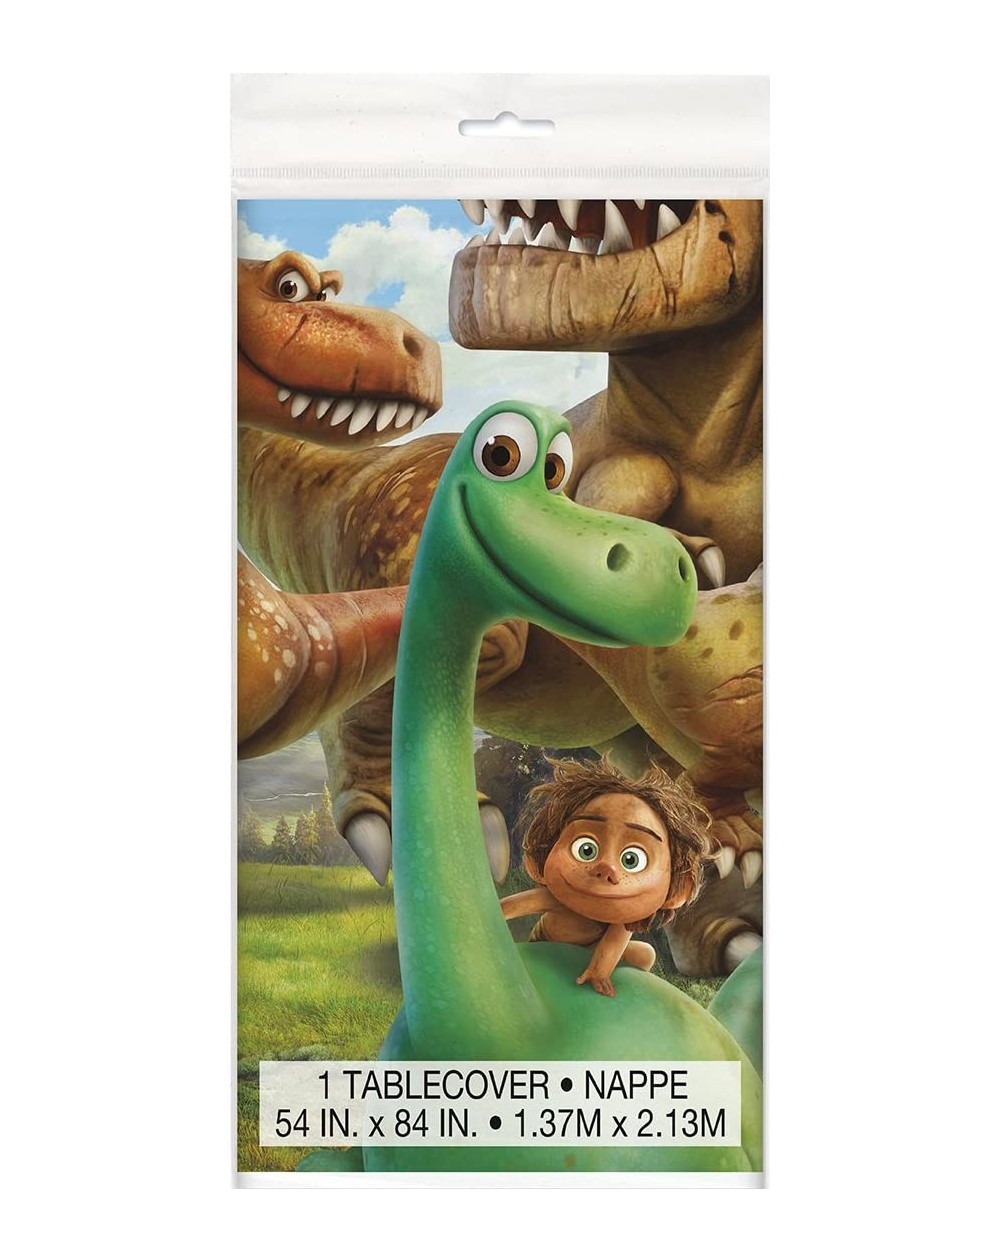 Tablecovers The Good Dinosaur Plastic Table Cover - C9127JZKEQZ $26.08